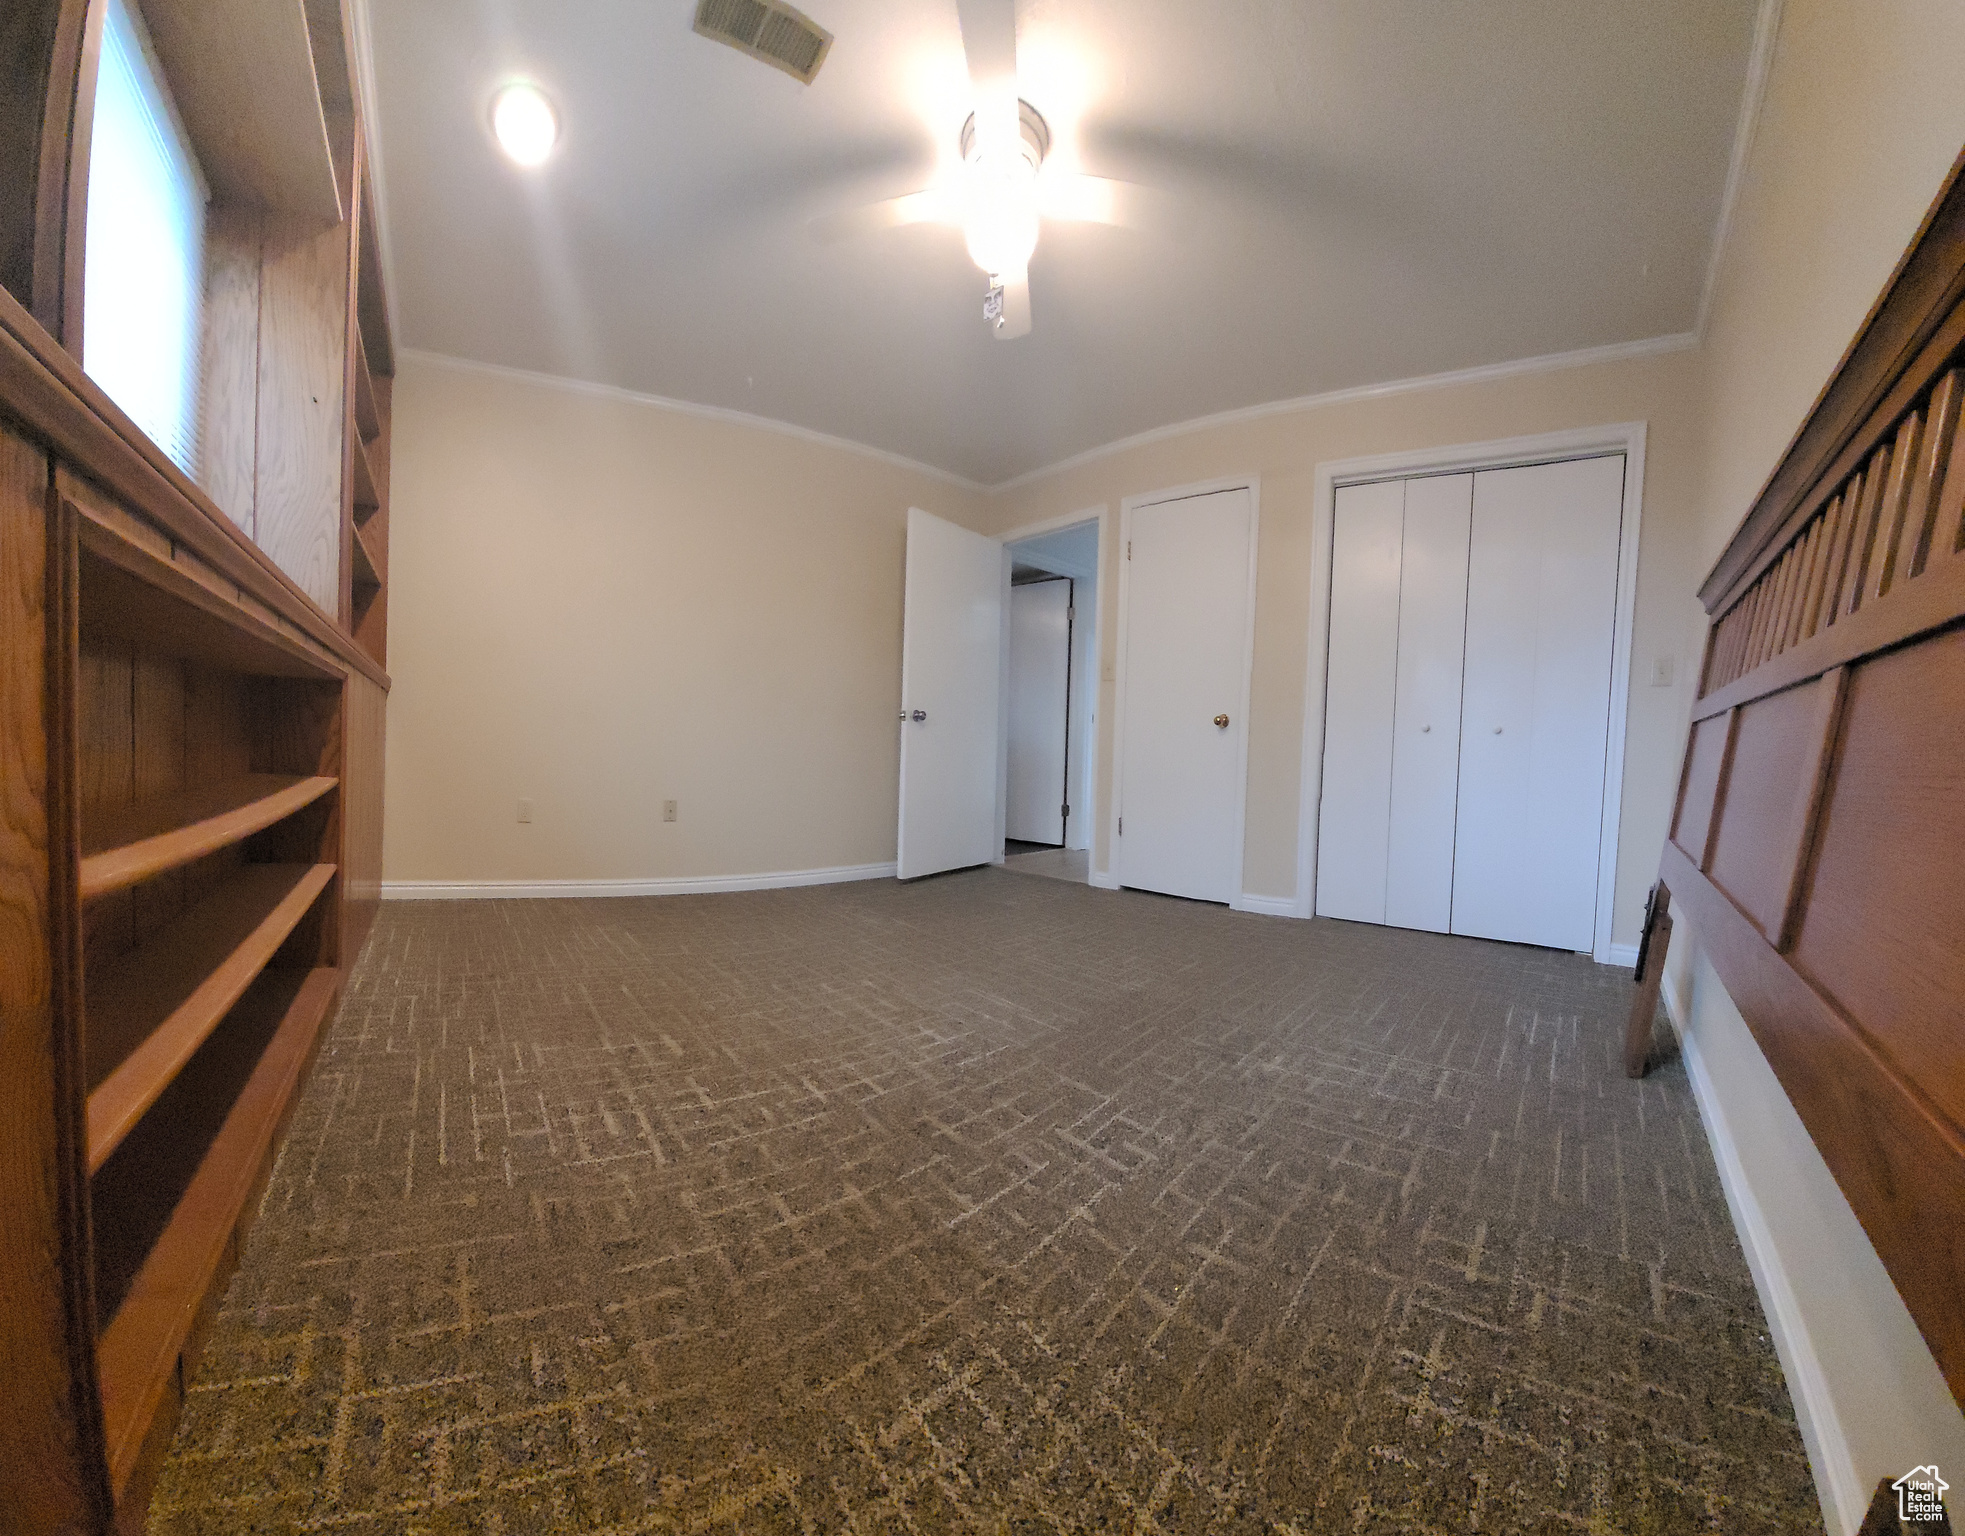 5th Bedroom featuring 2 closets a